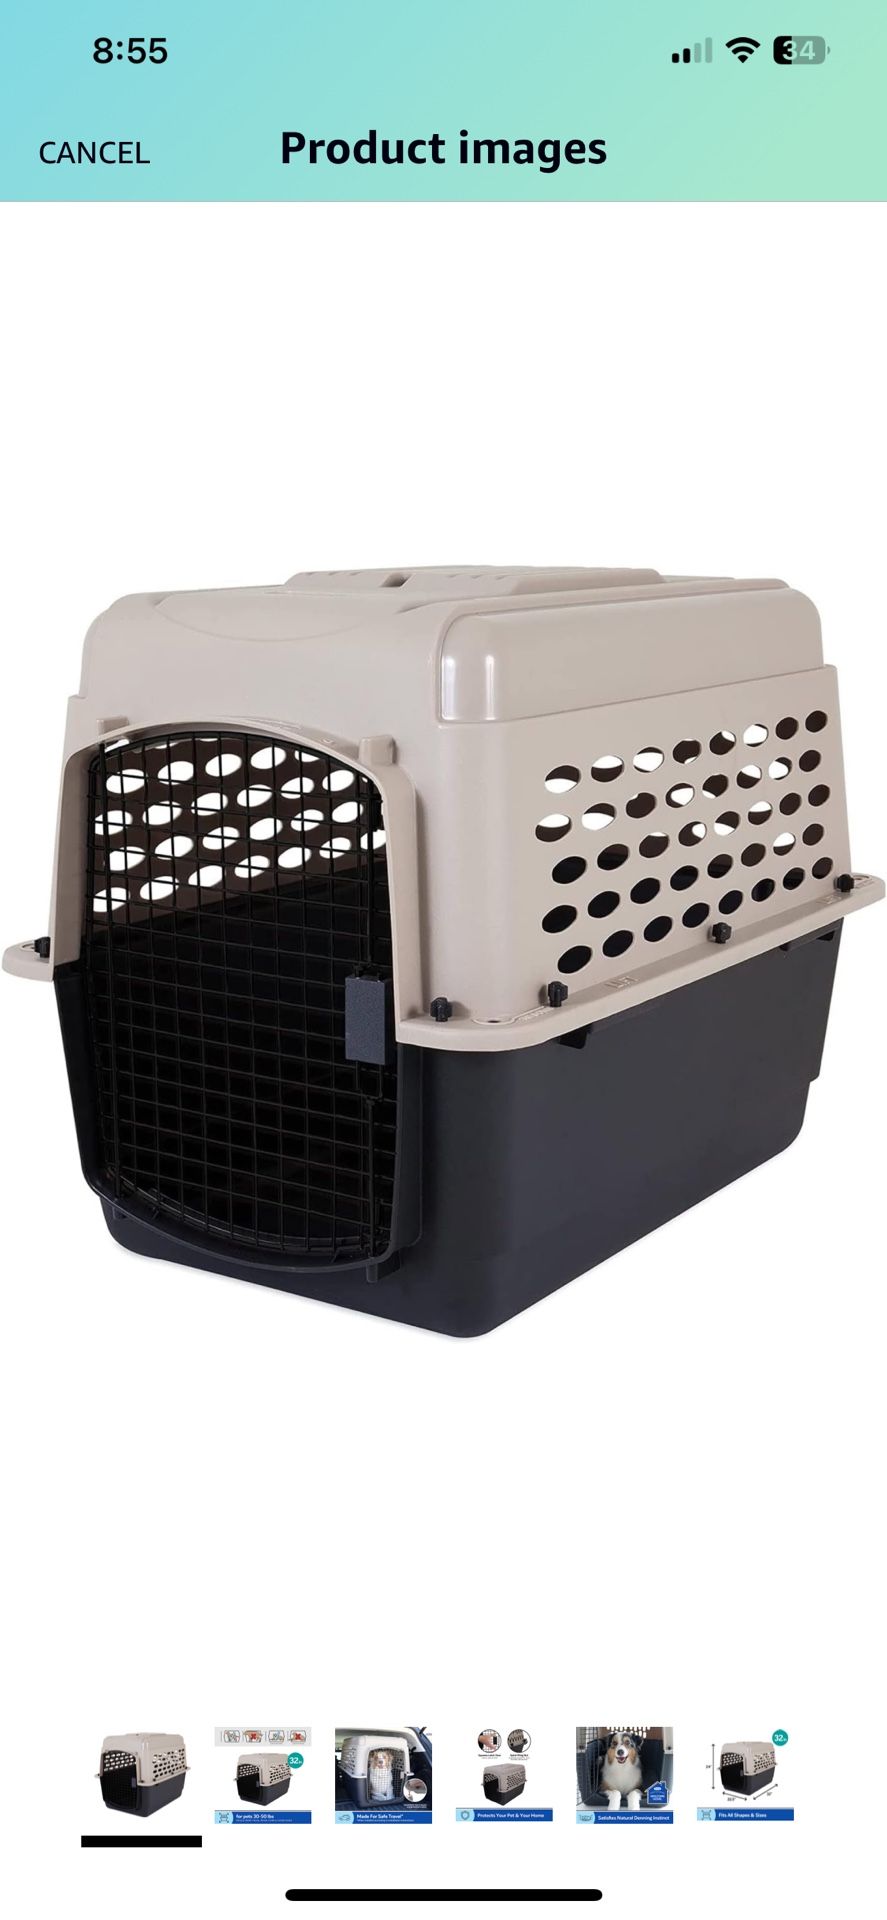 Petmate Vari Dog Kennel 32", Taupe & Black, Portable Dog Crate for Pets 30-50lbs, Made in USA